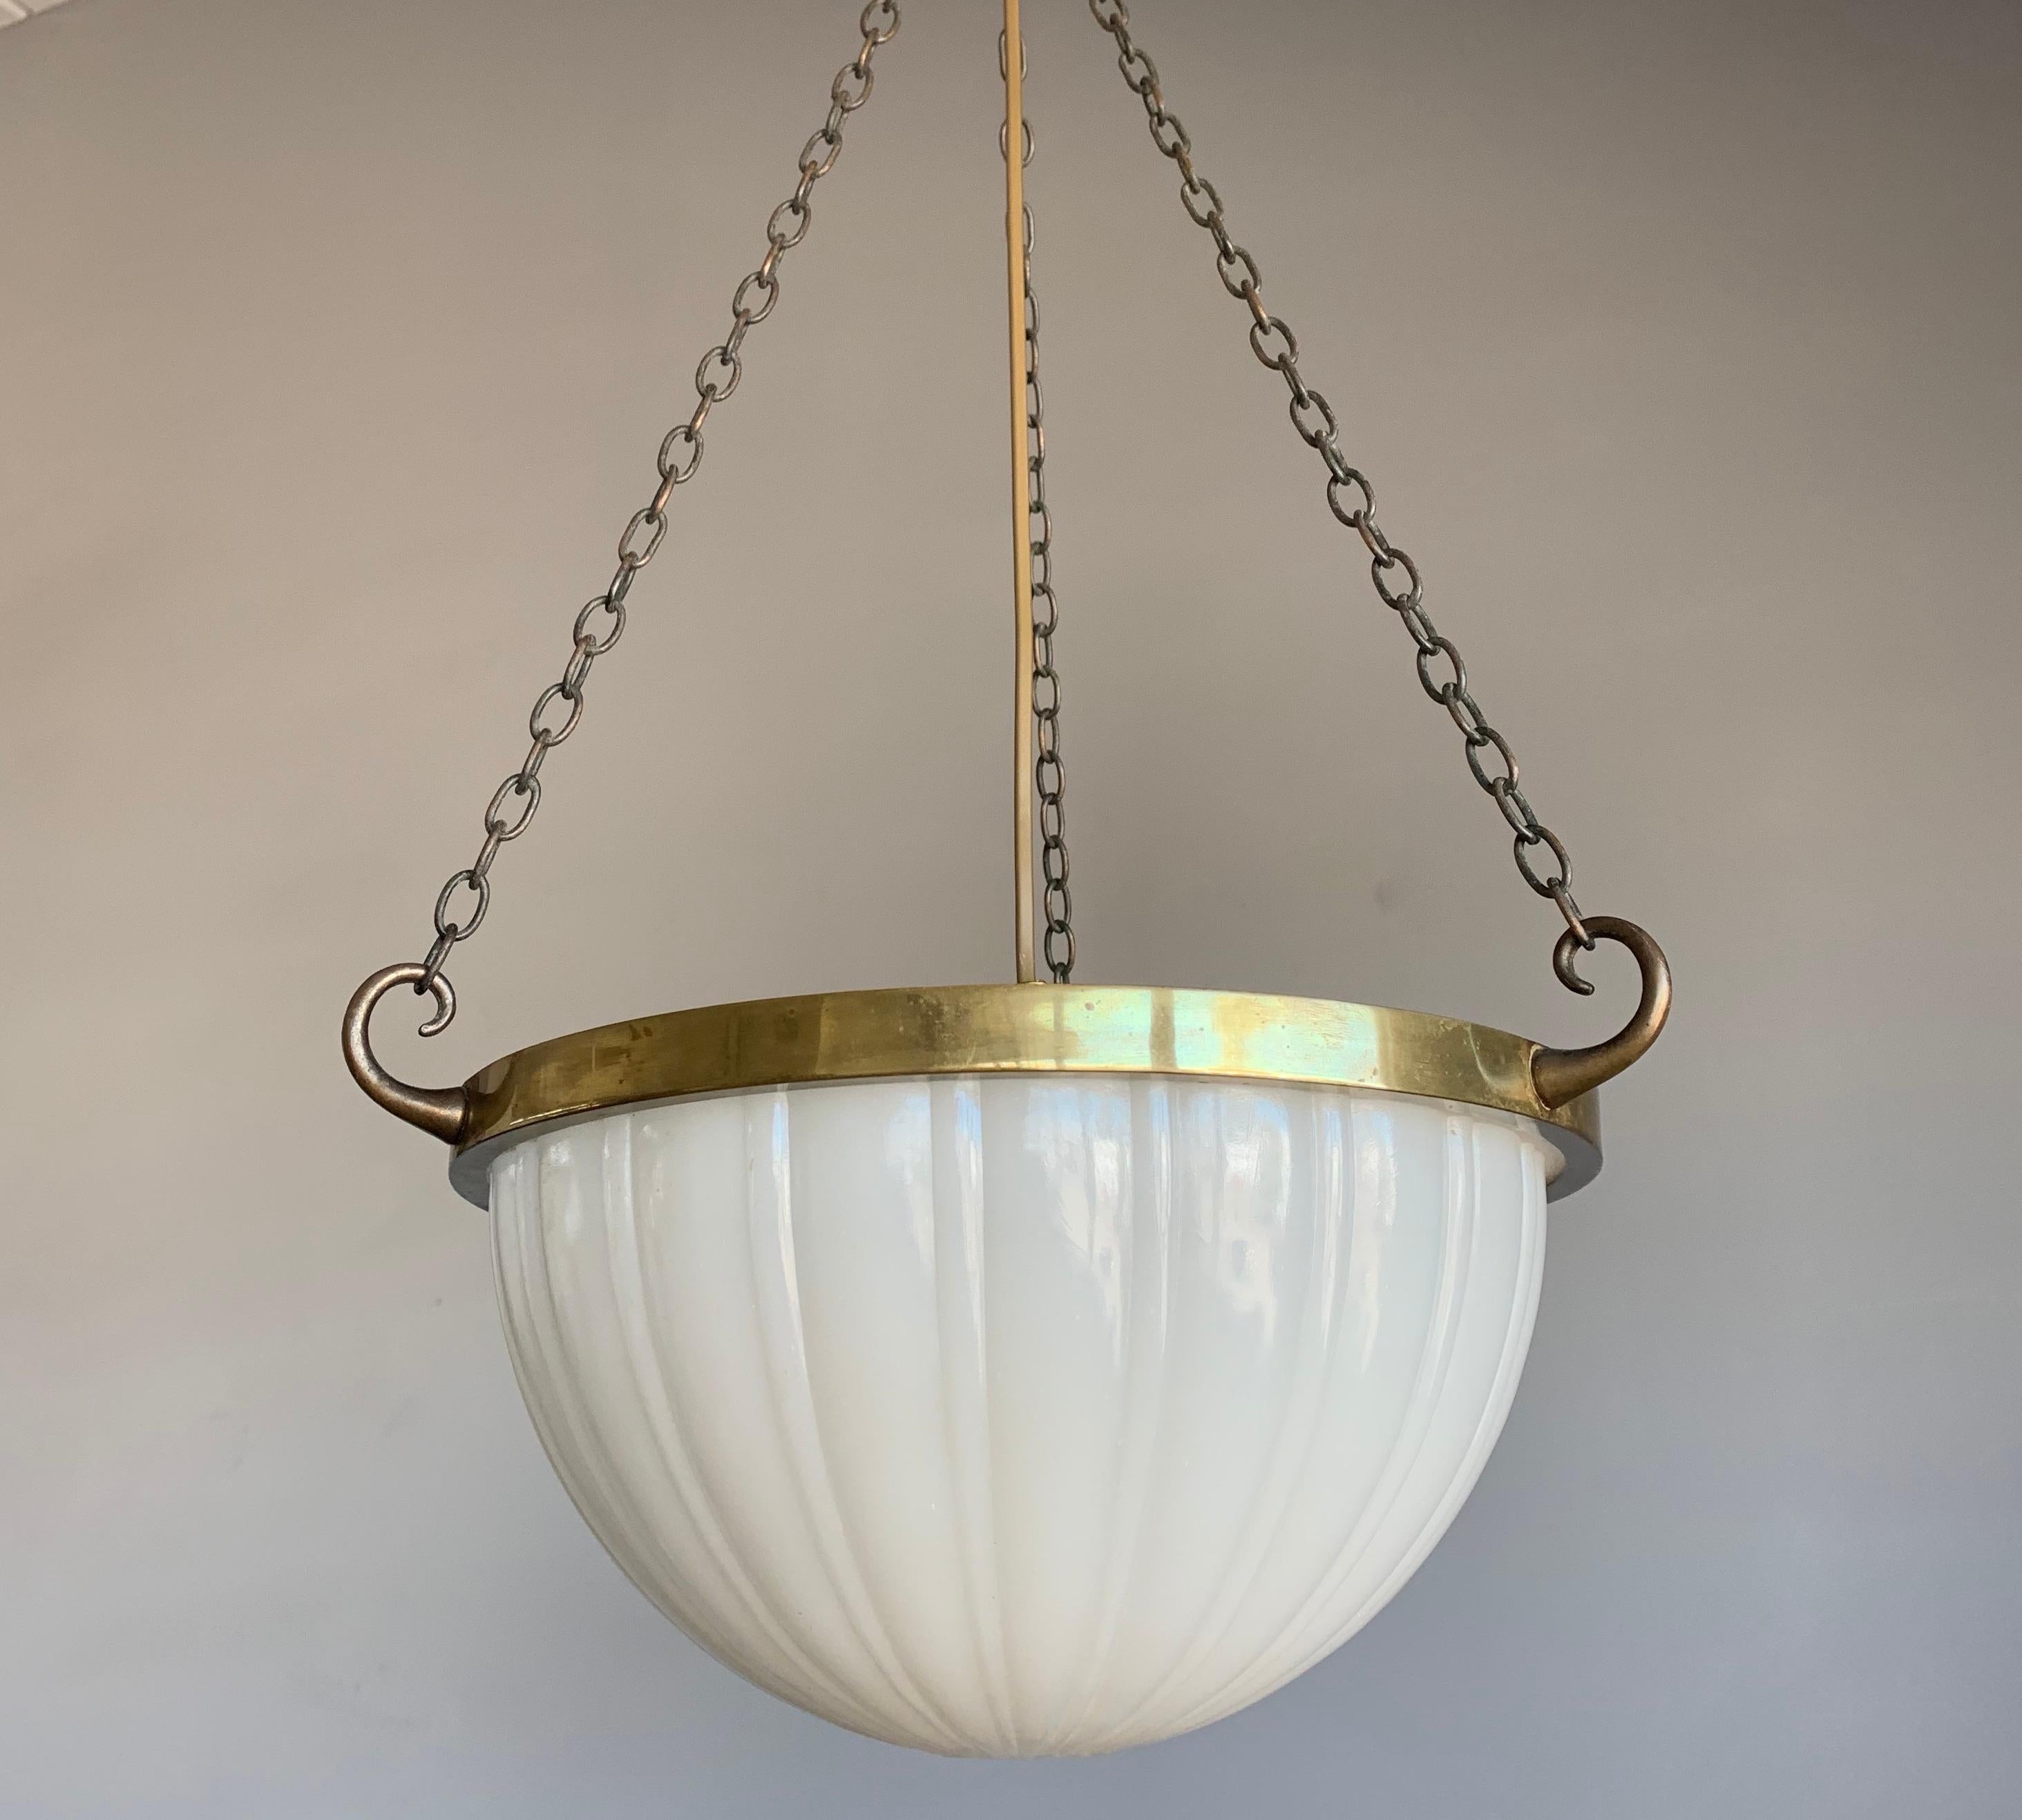 Excellent condition and shape opaline glass chandelier.

This incredibly stylish, American-made pendant is in excellent condition and it is an absolute joy to look at, both on and off. To us, this small American classical pendant can only go to one